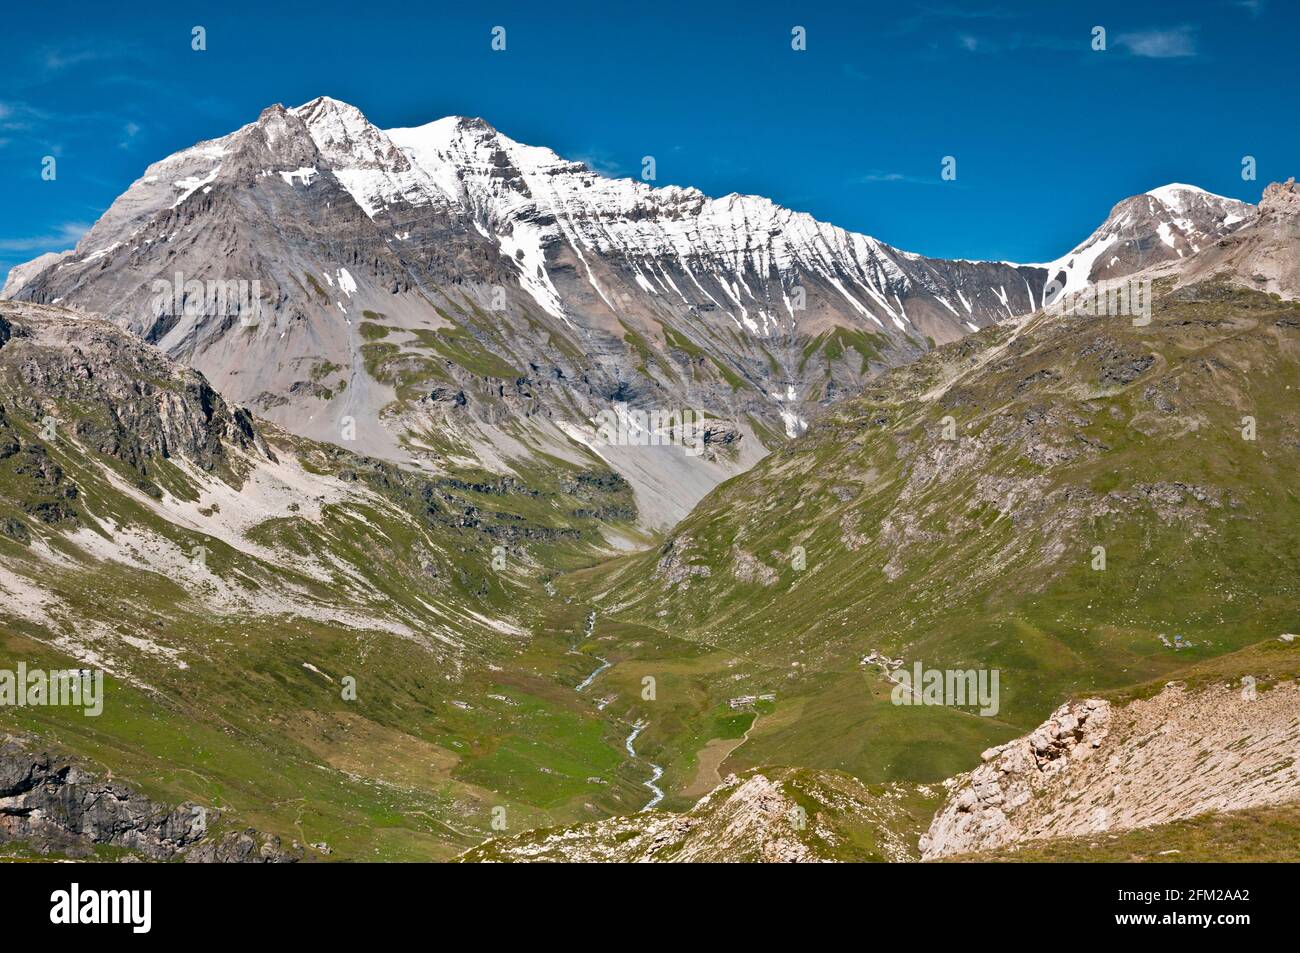 The Grande Casse summit (3855 m) in the Summer, located in the heart of the Vanoise National Park, Savoie (73), Auvergne-Rhone-Alpes region, France Stock Photo